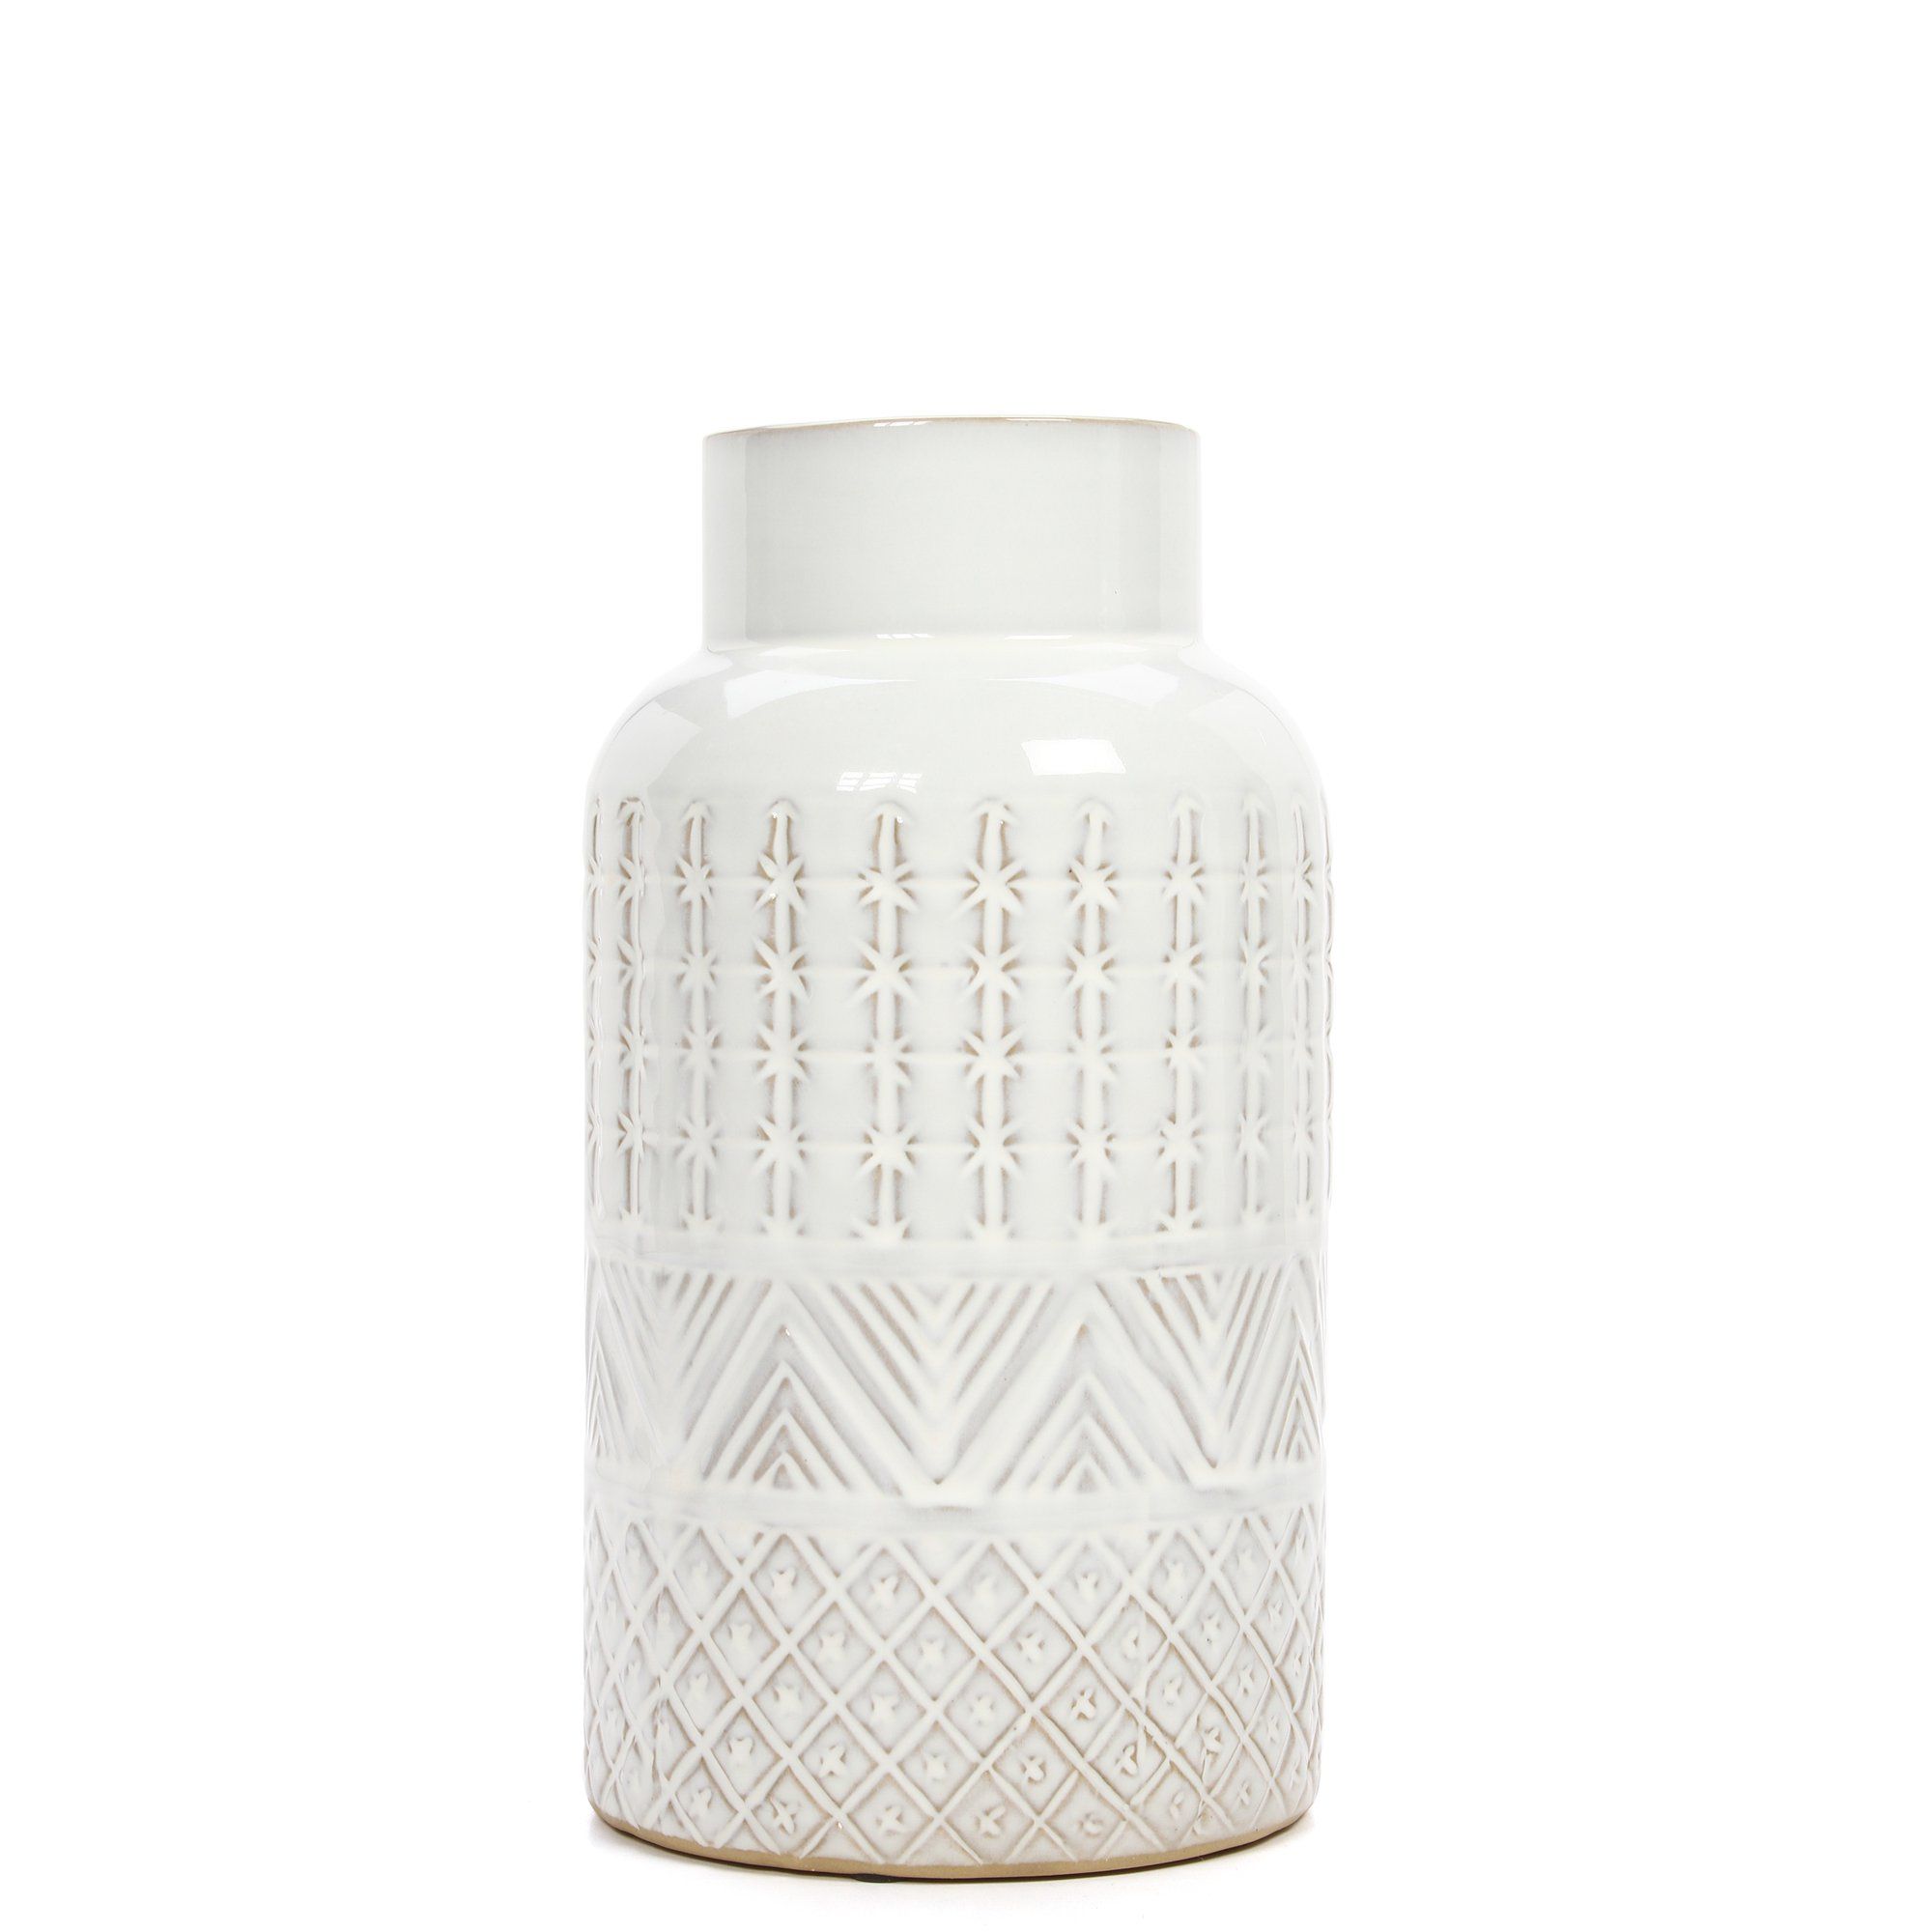 Better Homes and Gardens Small Cream Textured Vase | Walmart (US)